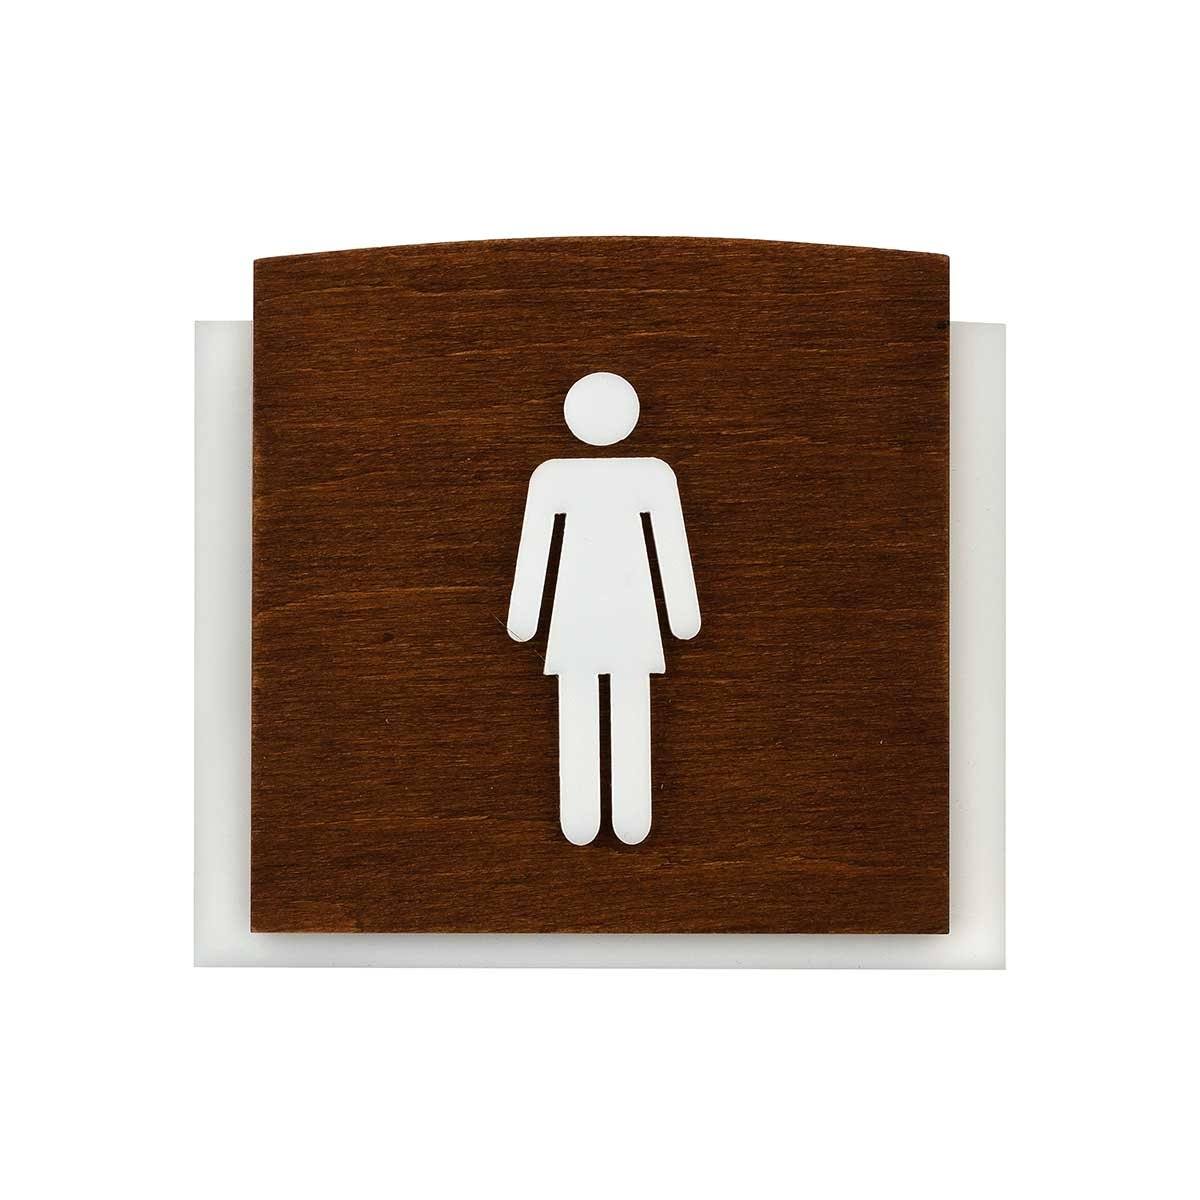  Wooden Restroom Signs for Woman Bathroom Signs Indian Rosewood Bsign